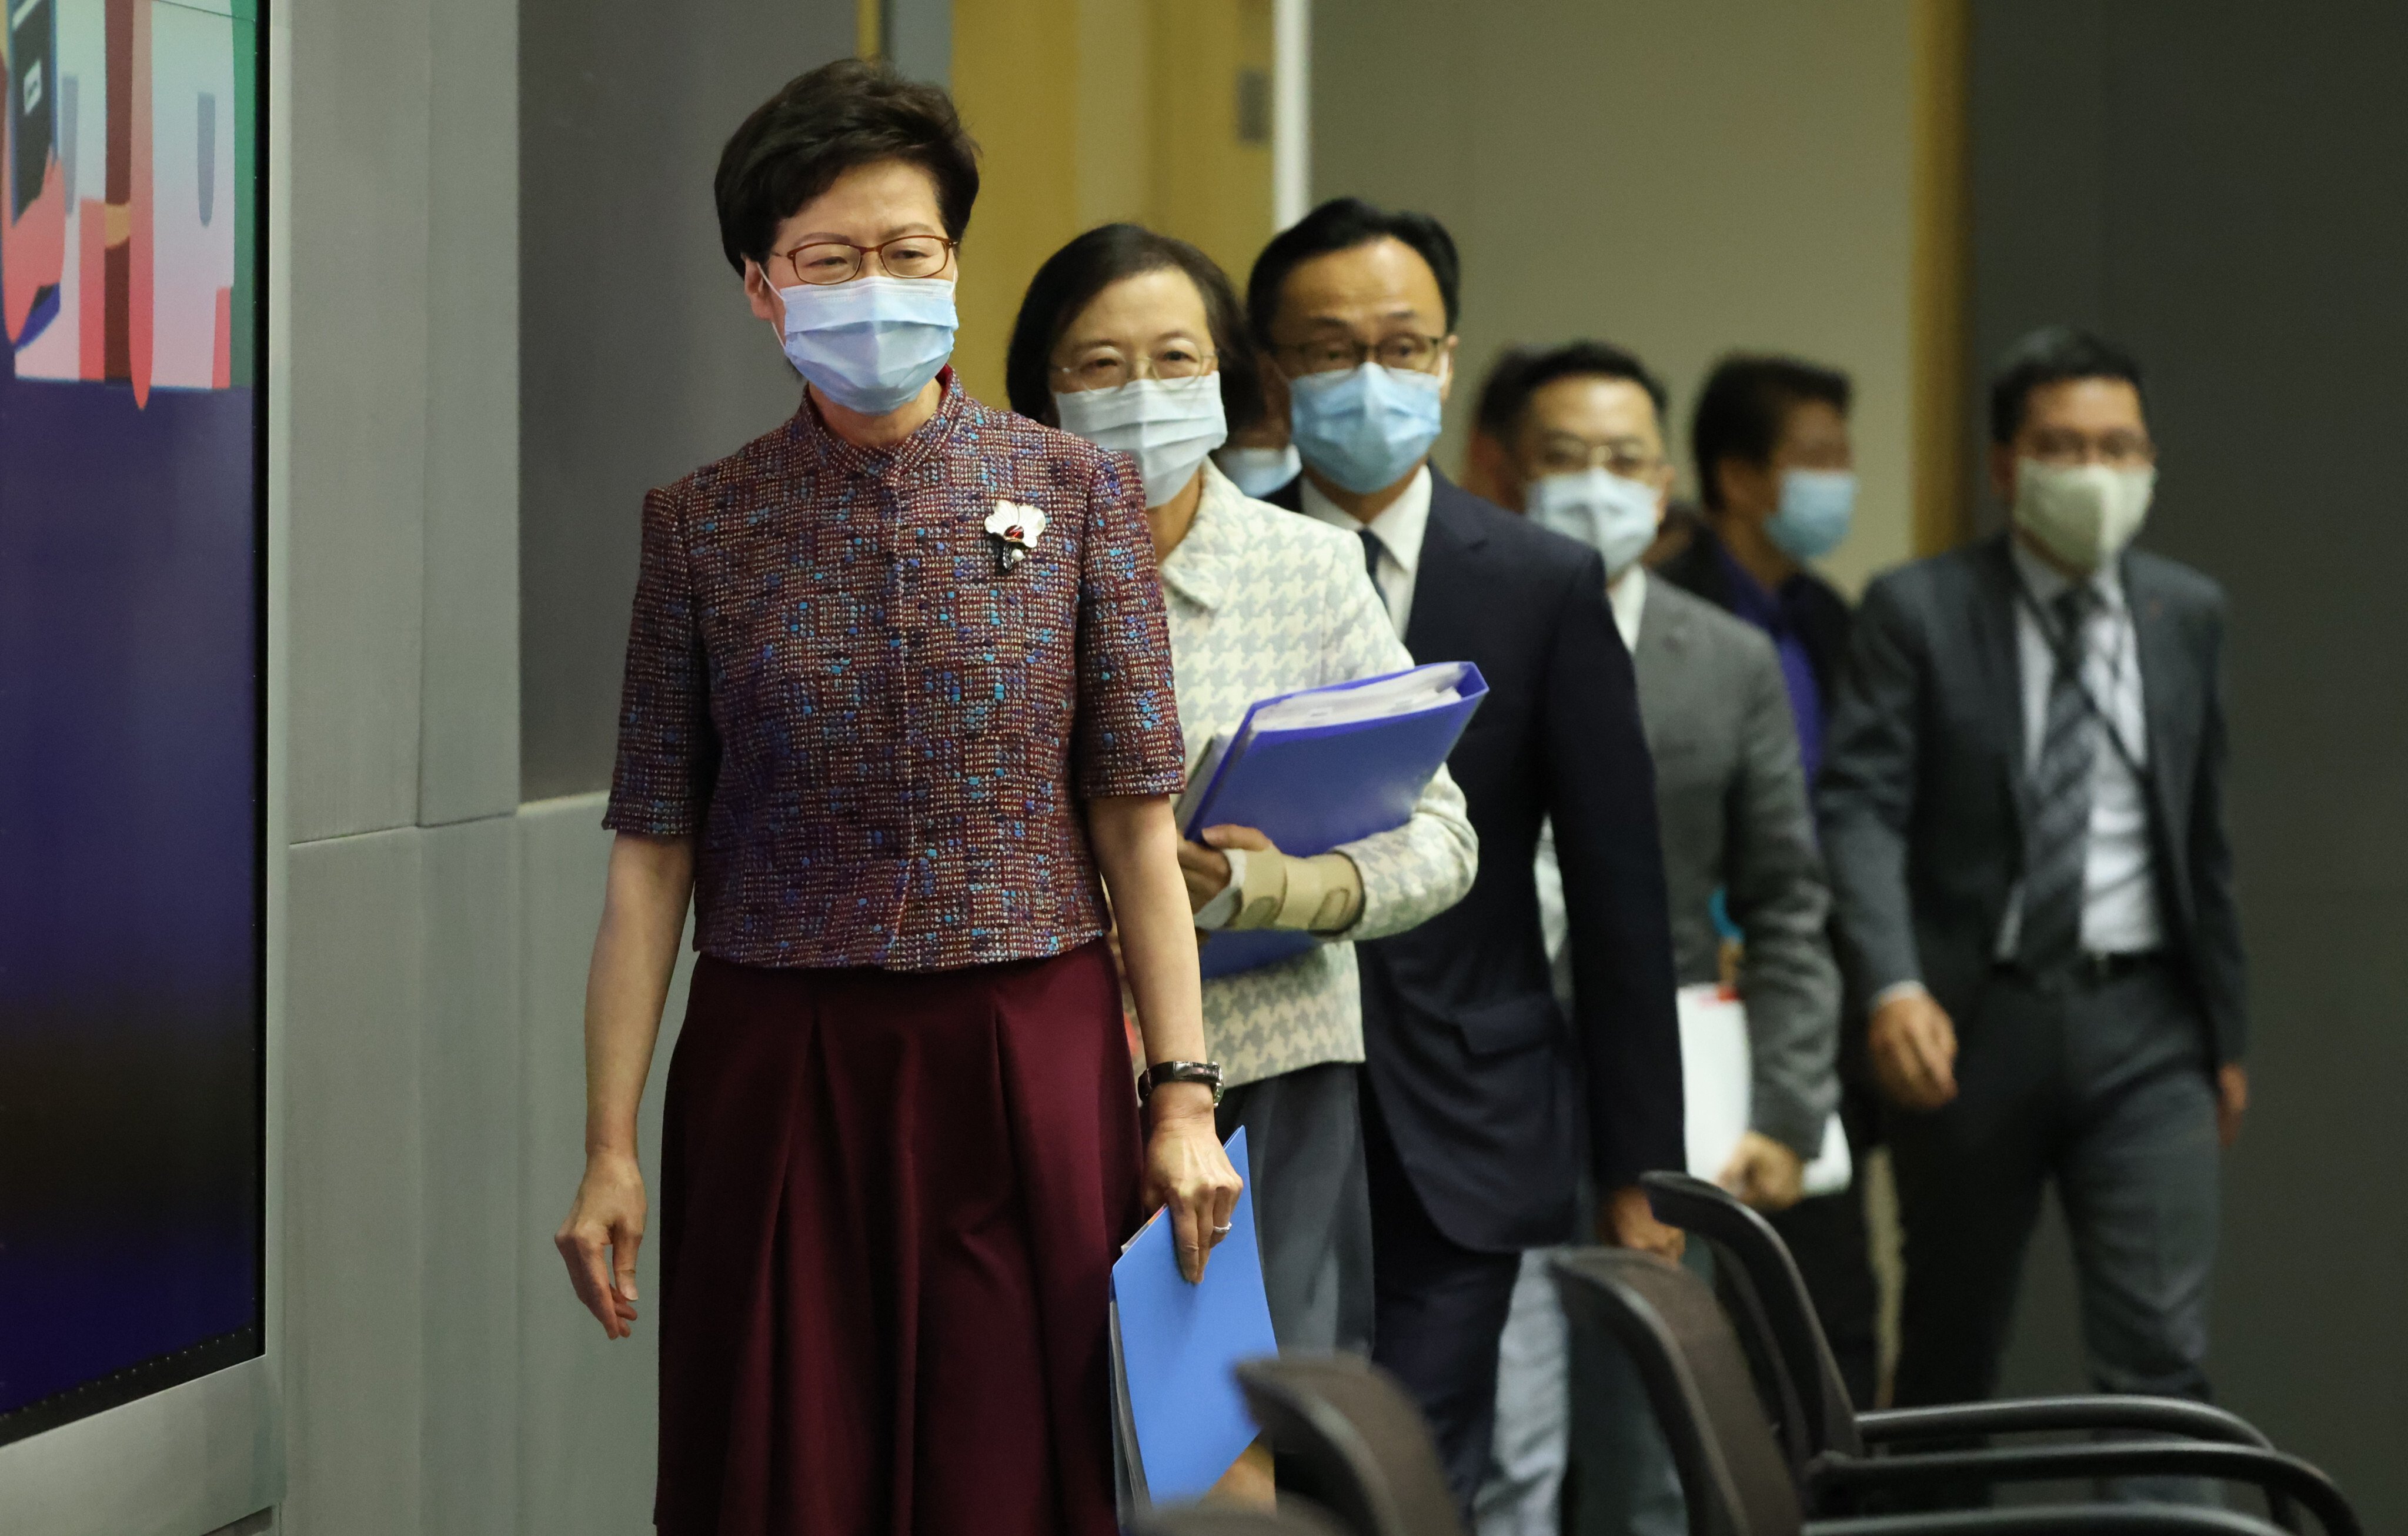 Chief Executive Carrie Lam, followed by Secretary for Food and Health Sophia Chan and Secretary for the Civil Service Patrick Nip Tak-kuen, walks into a press conference at the government headquarters in Admiralty on June 21. Photo: Nora Tam